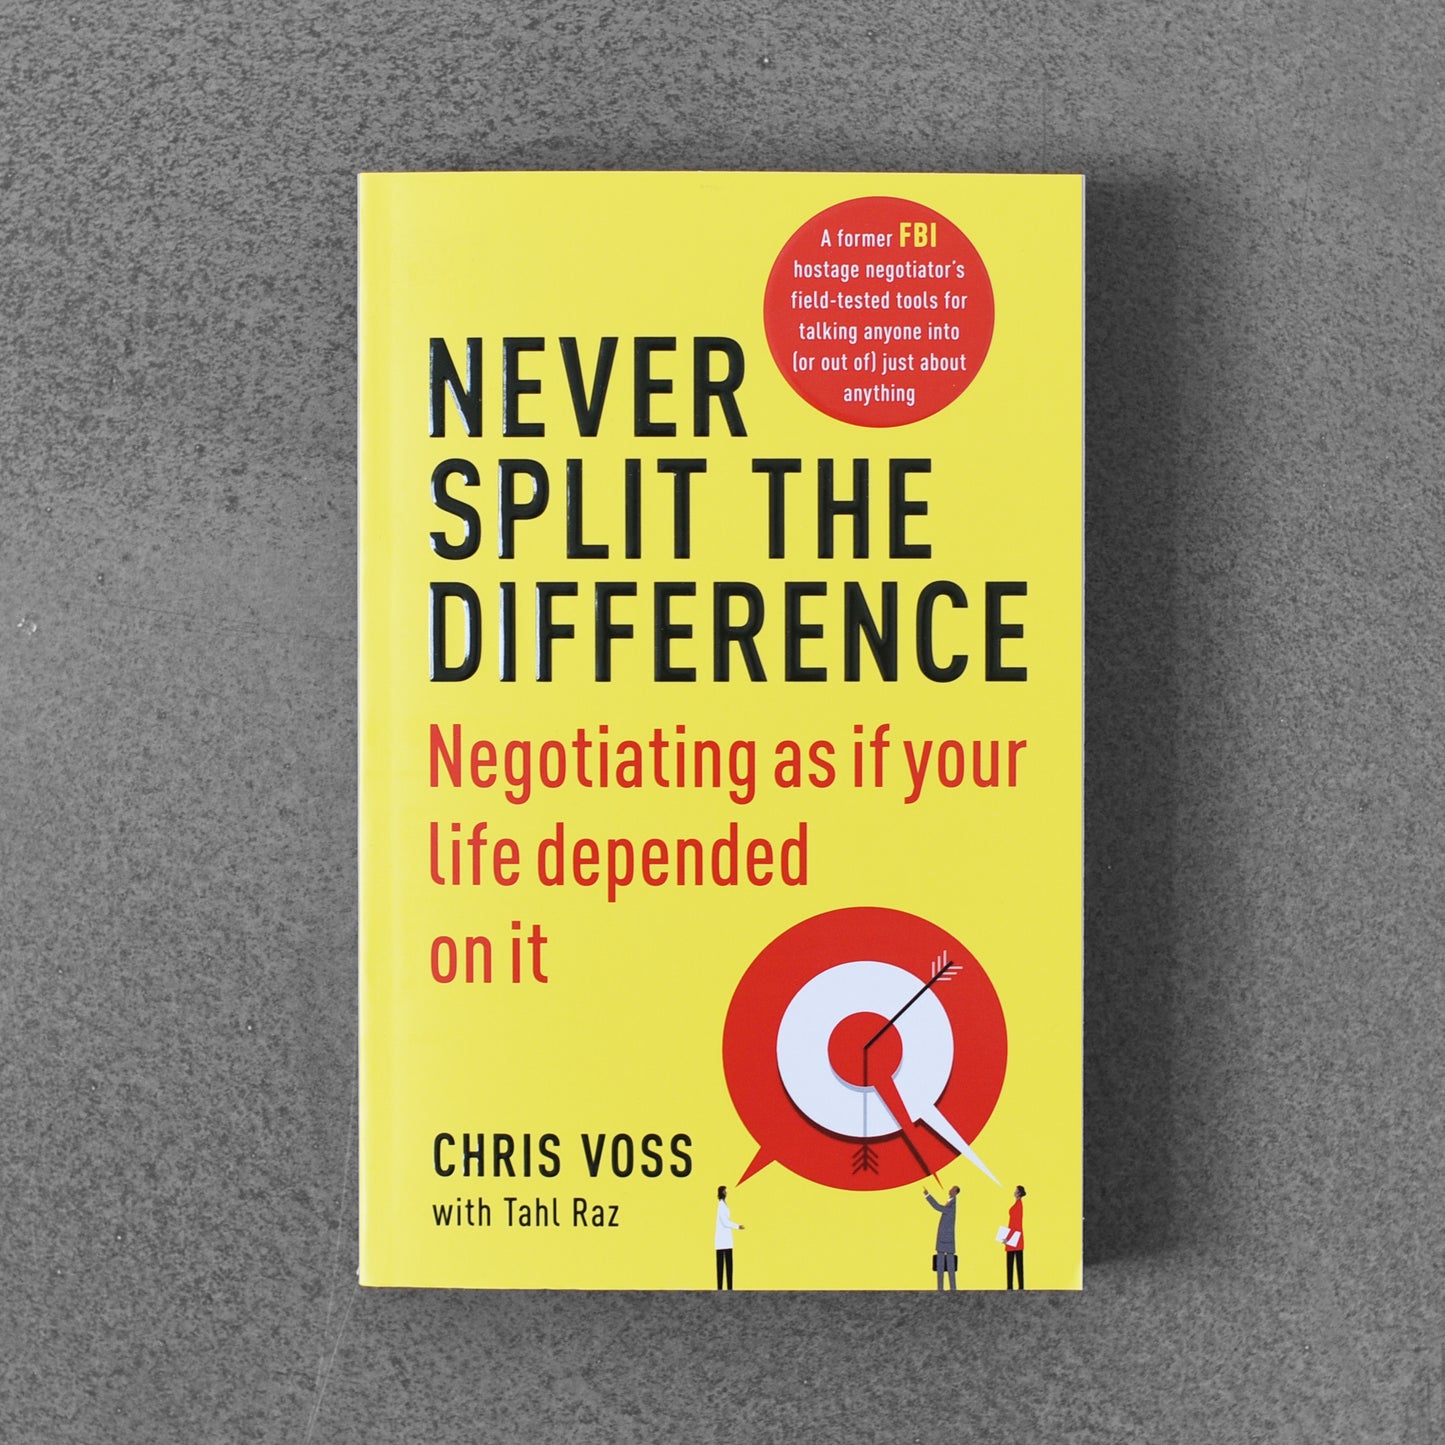 Never Split the Difference: Negotiating as if Your Life Depended on It - Chris Voss with Tahl Raz